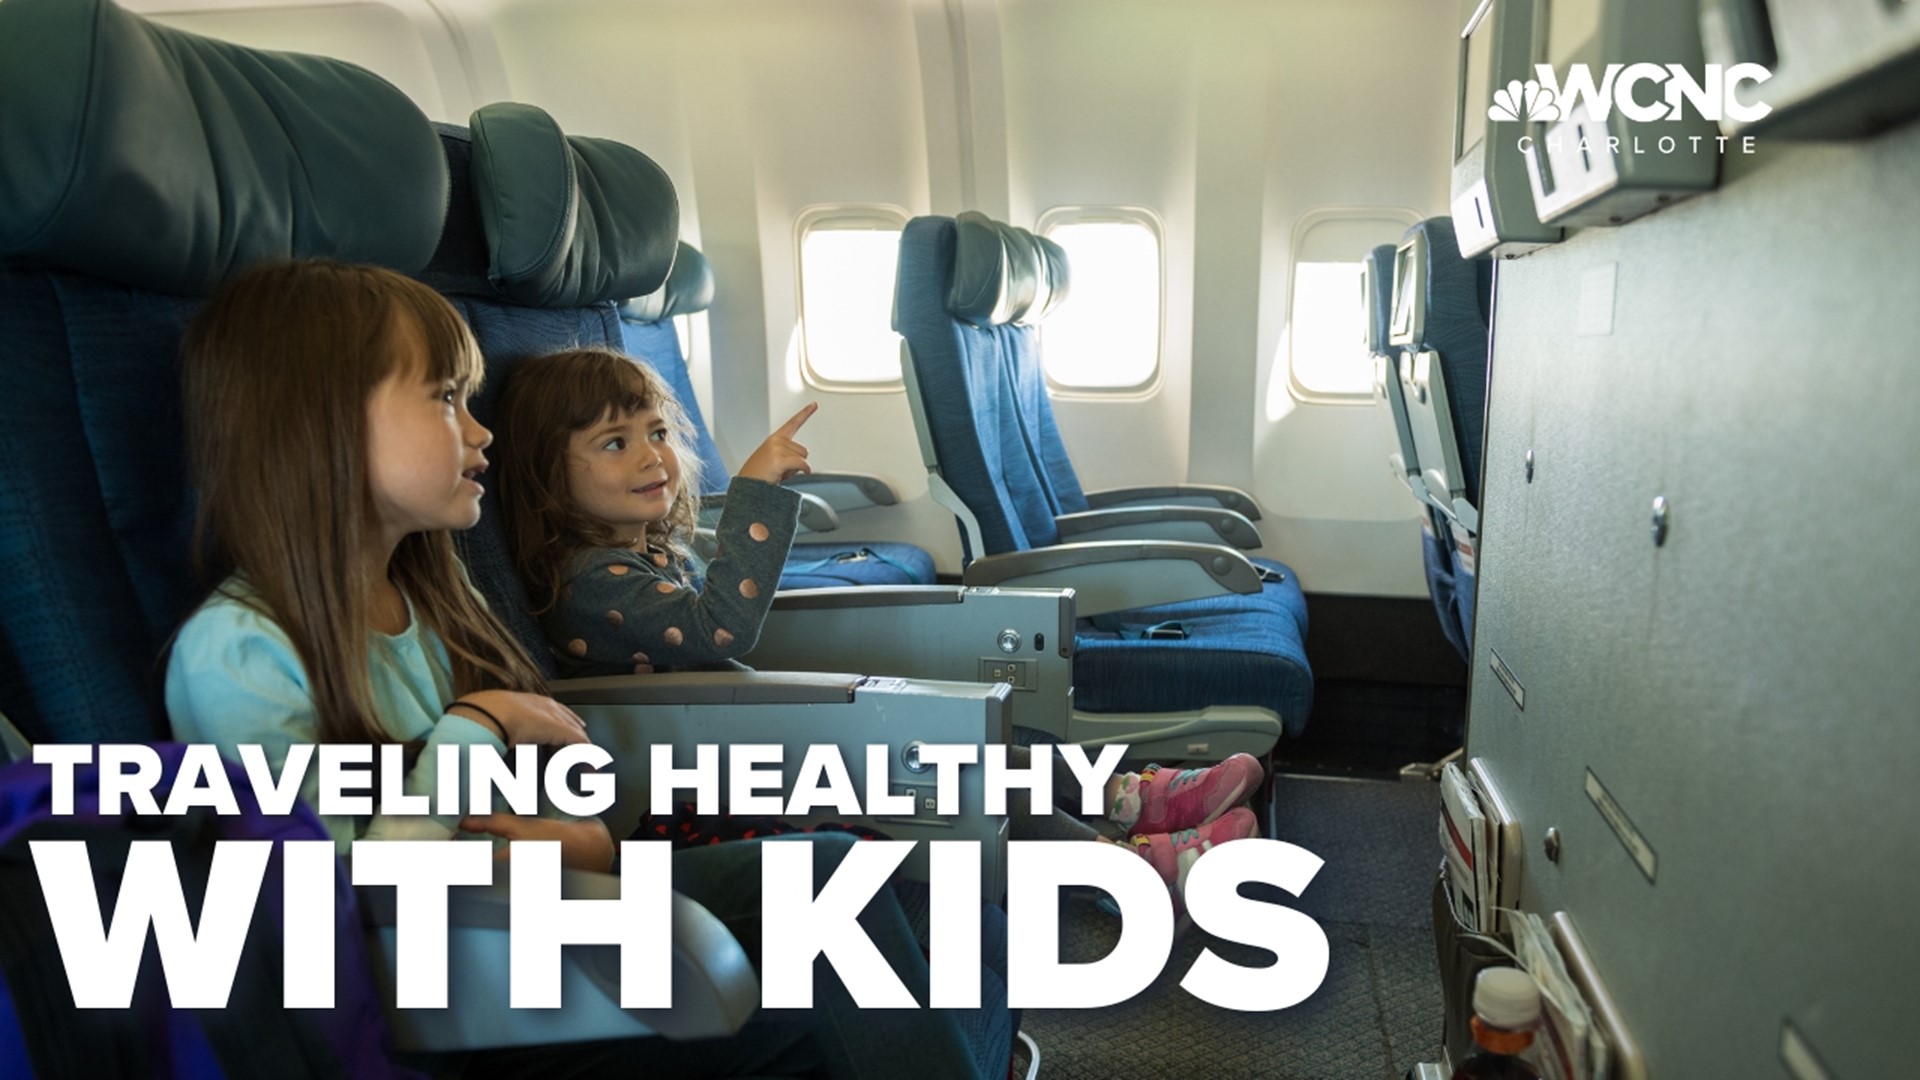 Sarah French shares practical tips to keep the kids healthy.